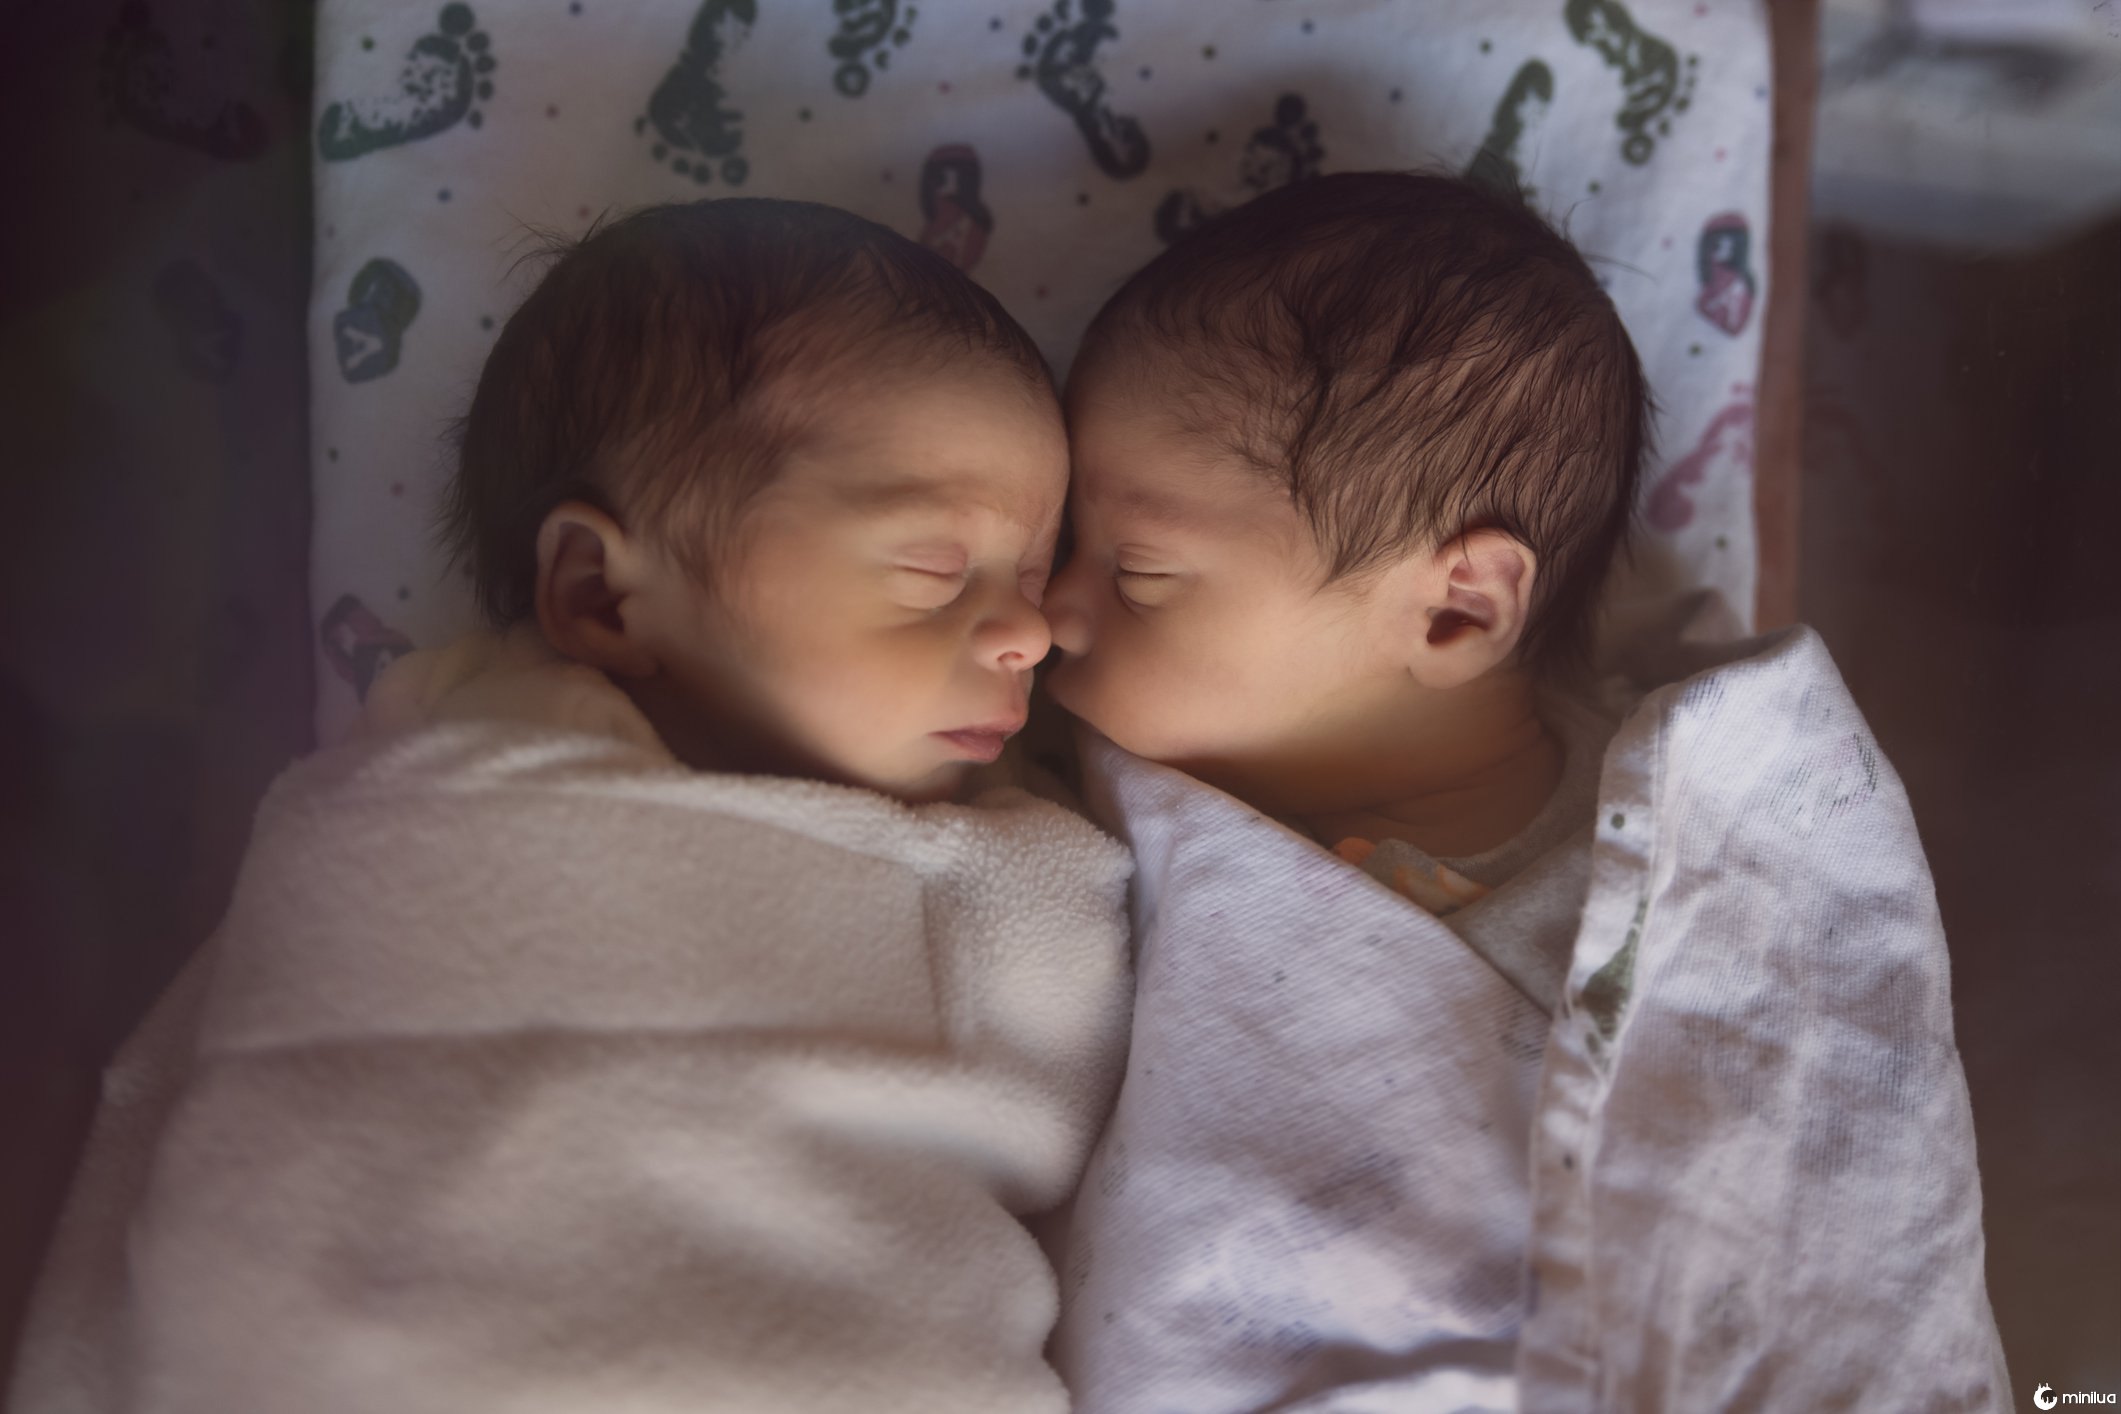 newborn male fraternal twins sleep peacefully after birth together swaddled and together in their crib.